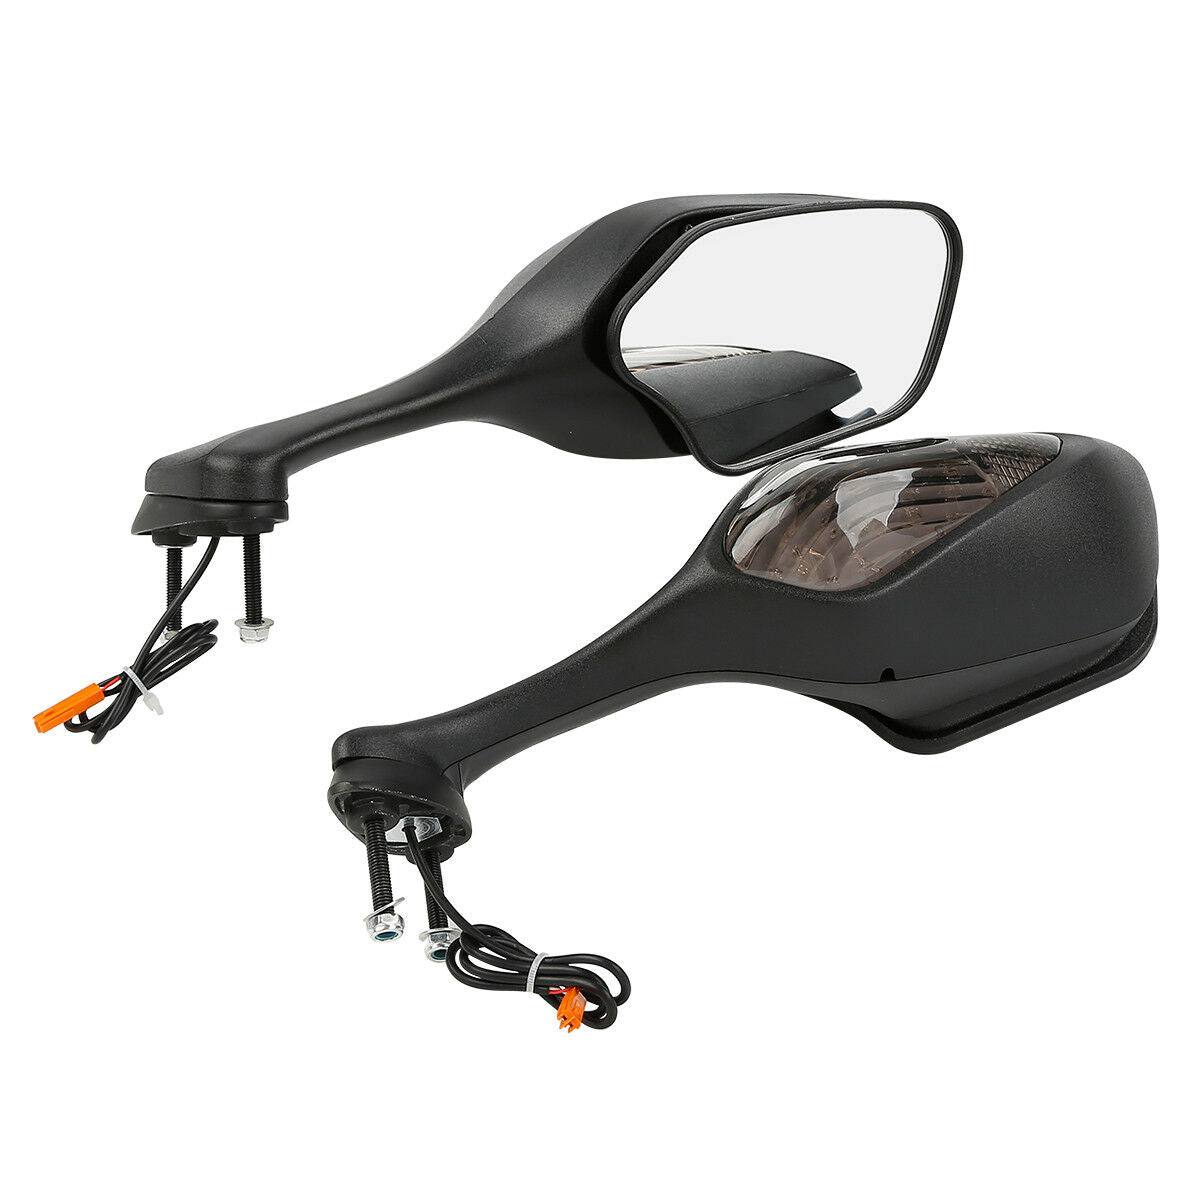 Rear View Mirrors W/ LED Turn Signal Fit For Honda CBR1000RR 2008-2016 2015 2014 - Moto Life Products